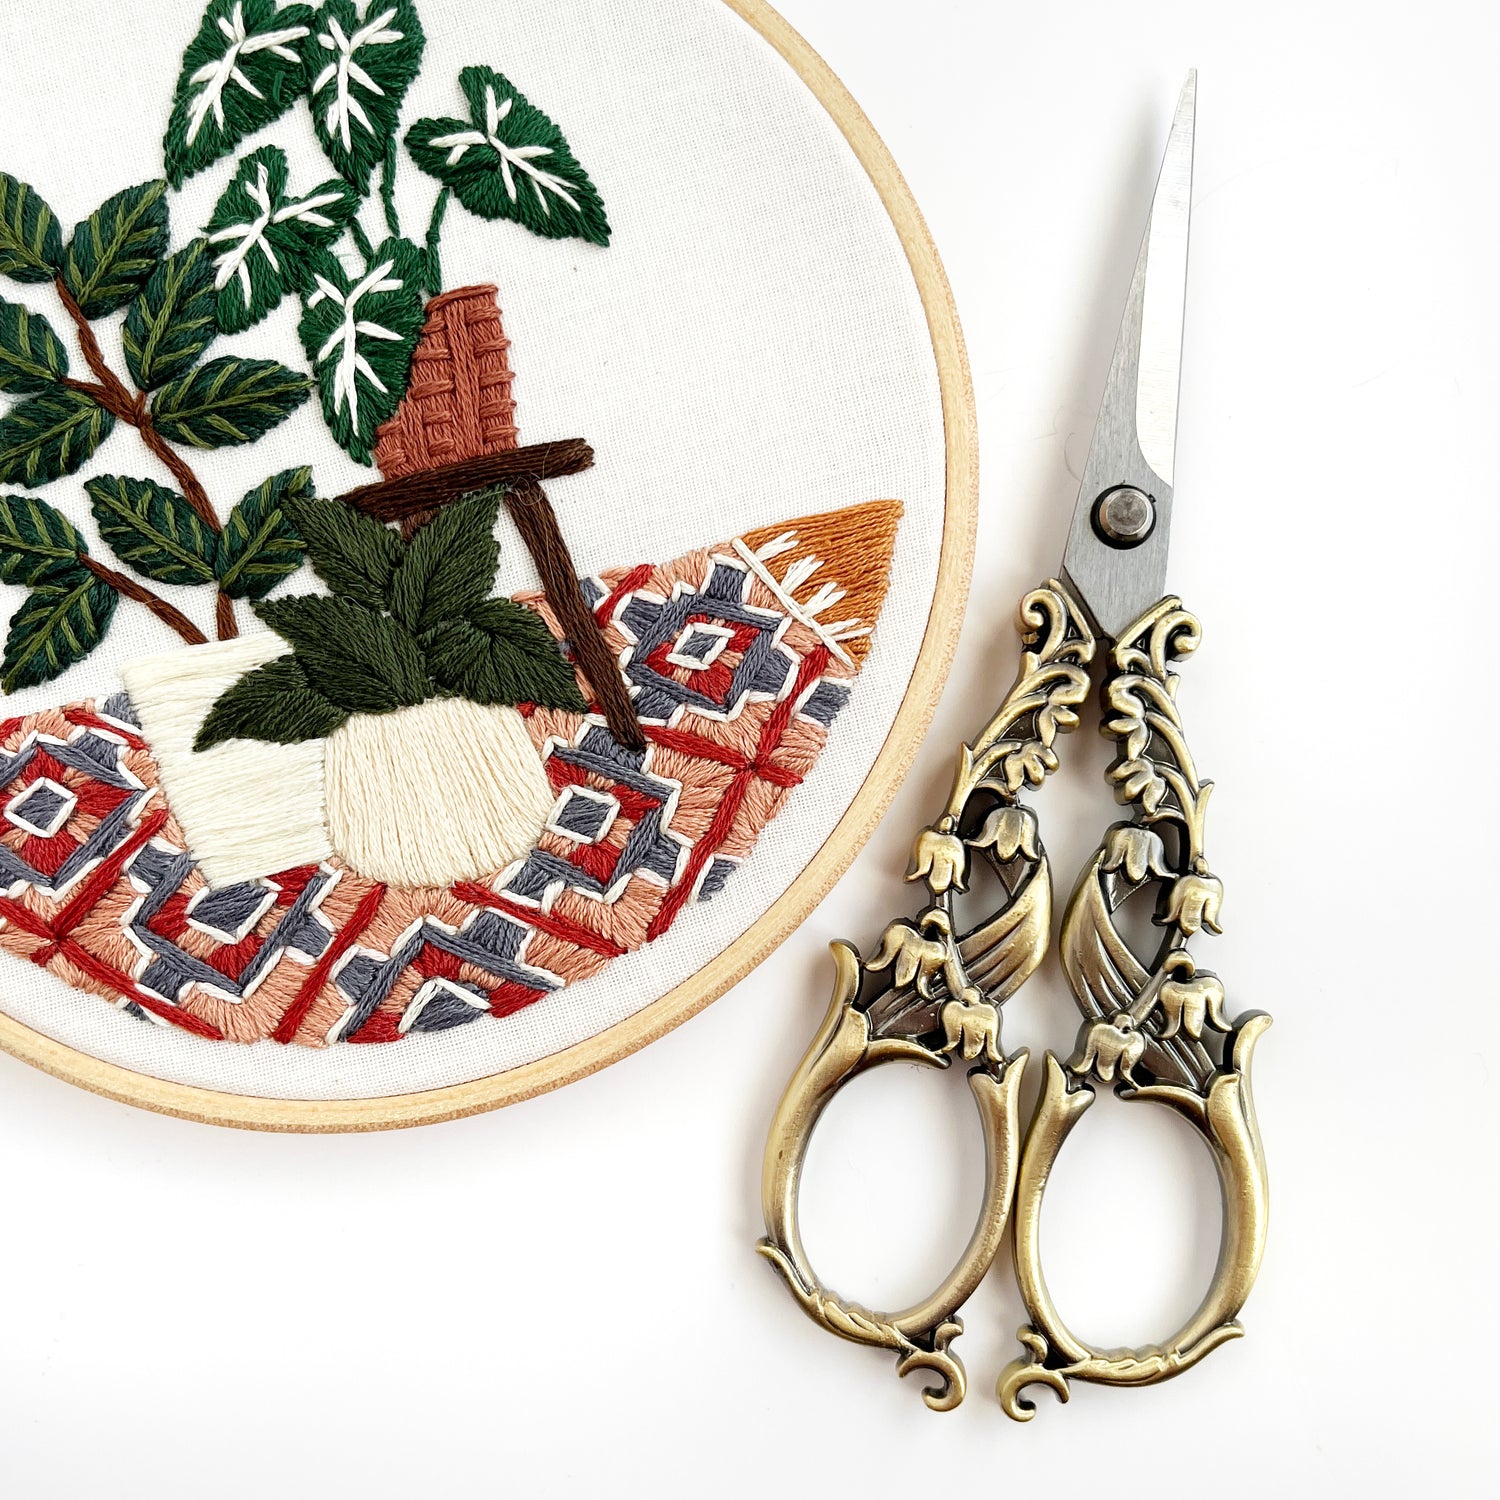 Embroidery Tools and Notions